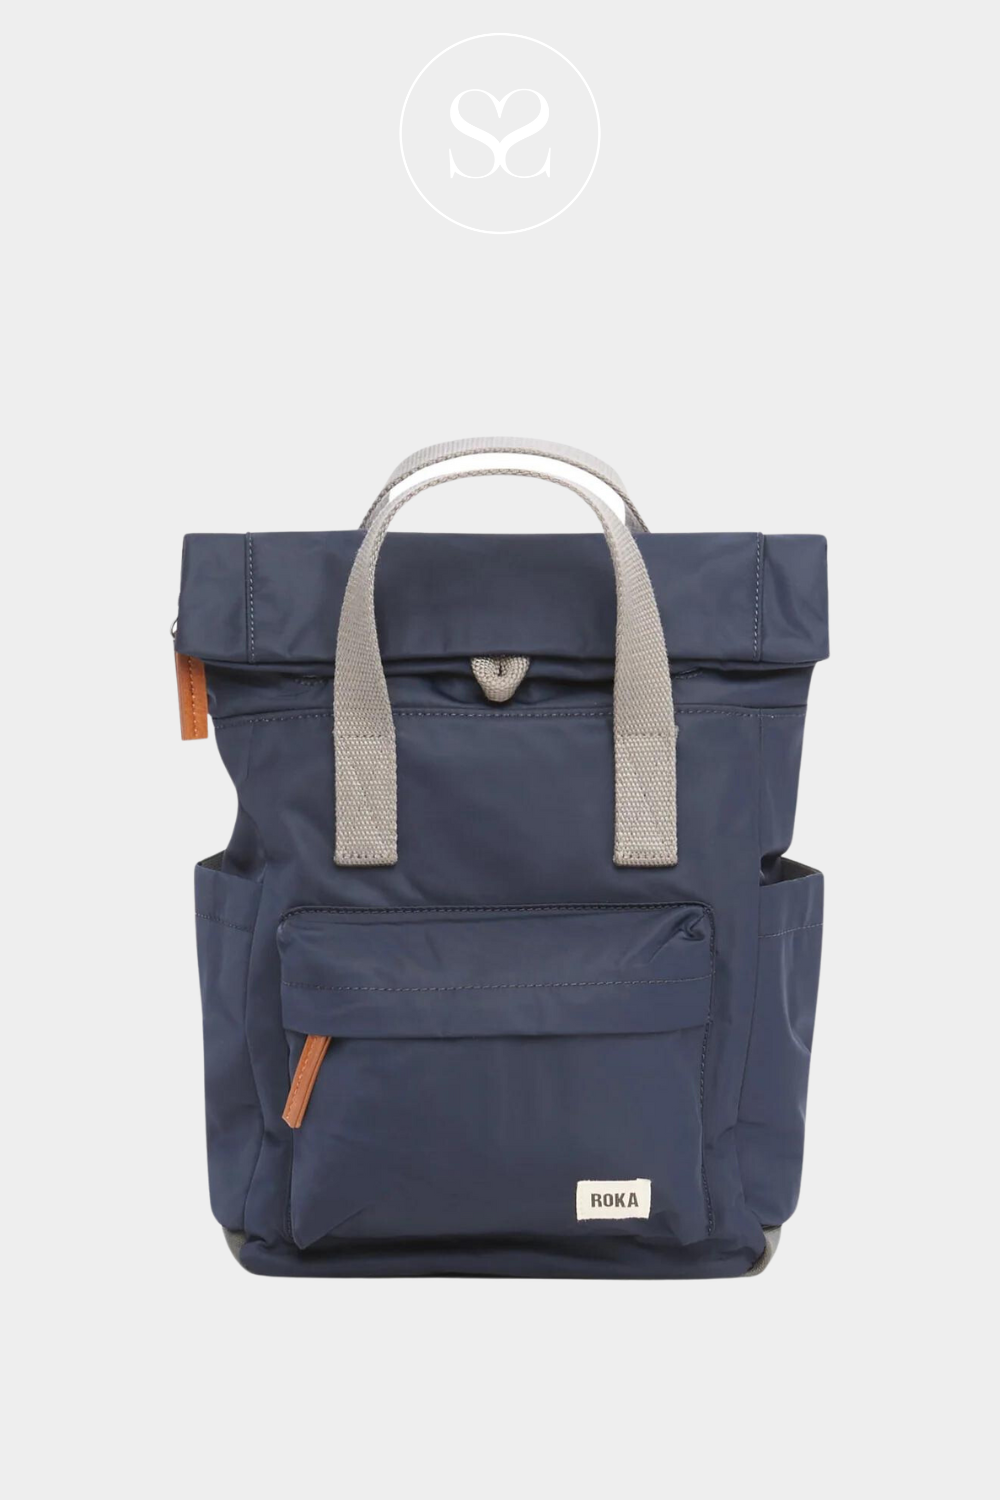 ROKA CANFIELD B SMALL NAVY WATERPROOF BACKPACK WITH MULTIPLE POCKETS AND GREY HANDLE. ALSO HAS A ROLL TOP TO ALLOW FOR EXTRA STORAGE.